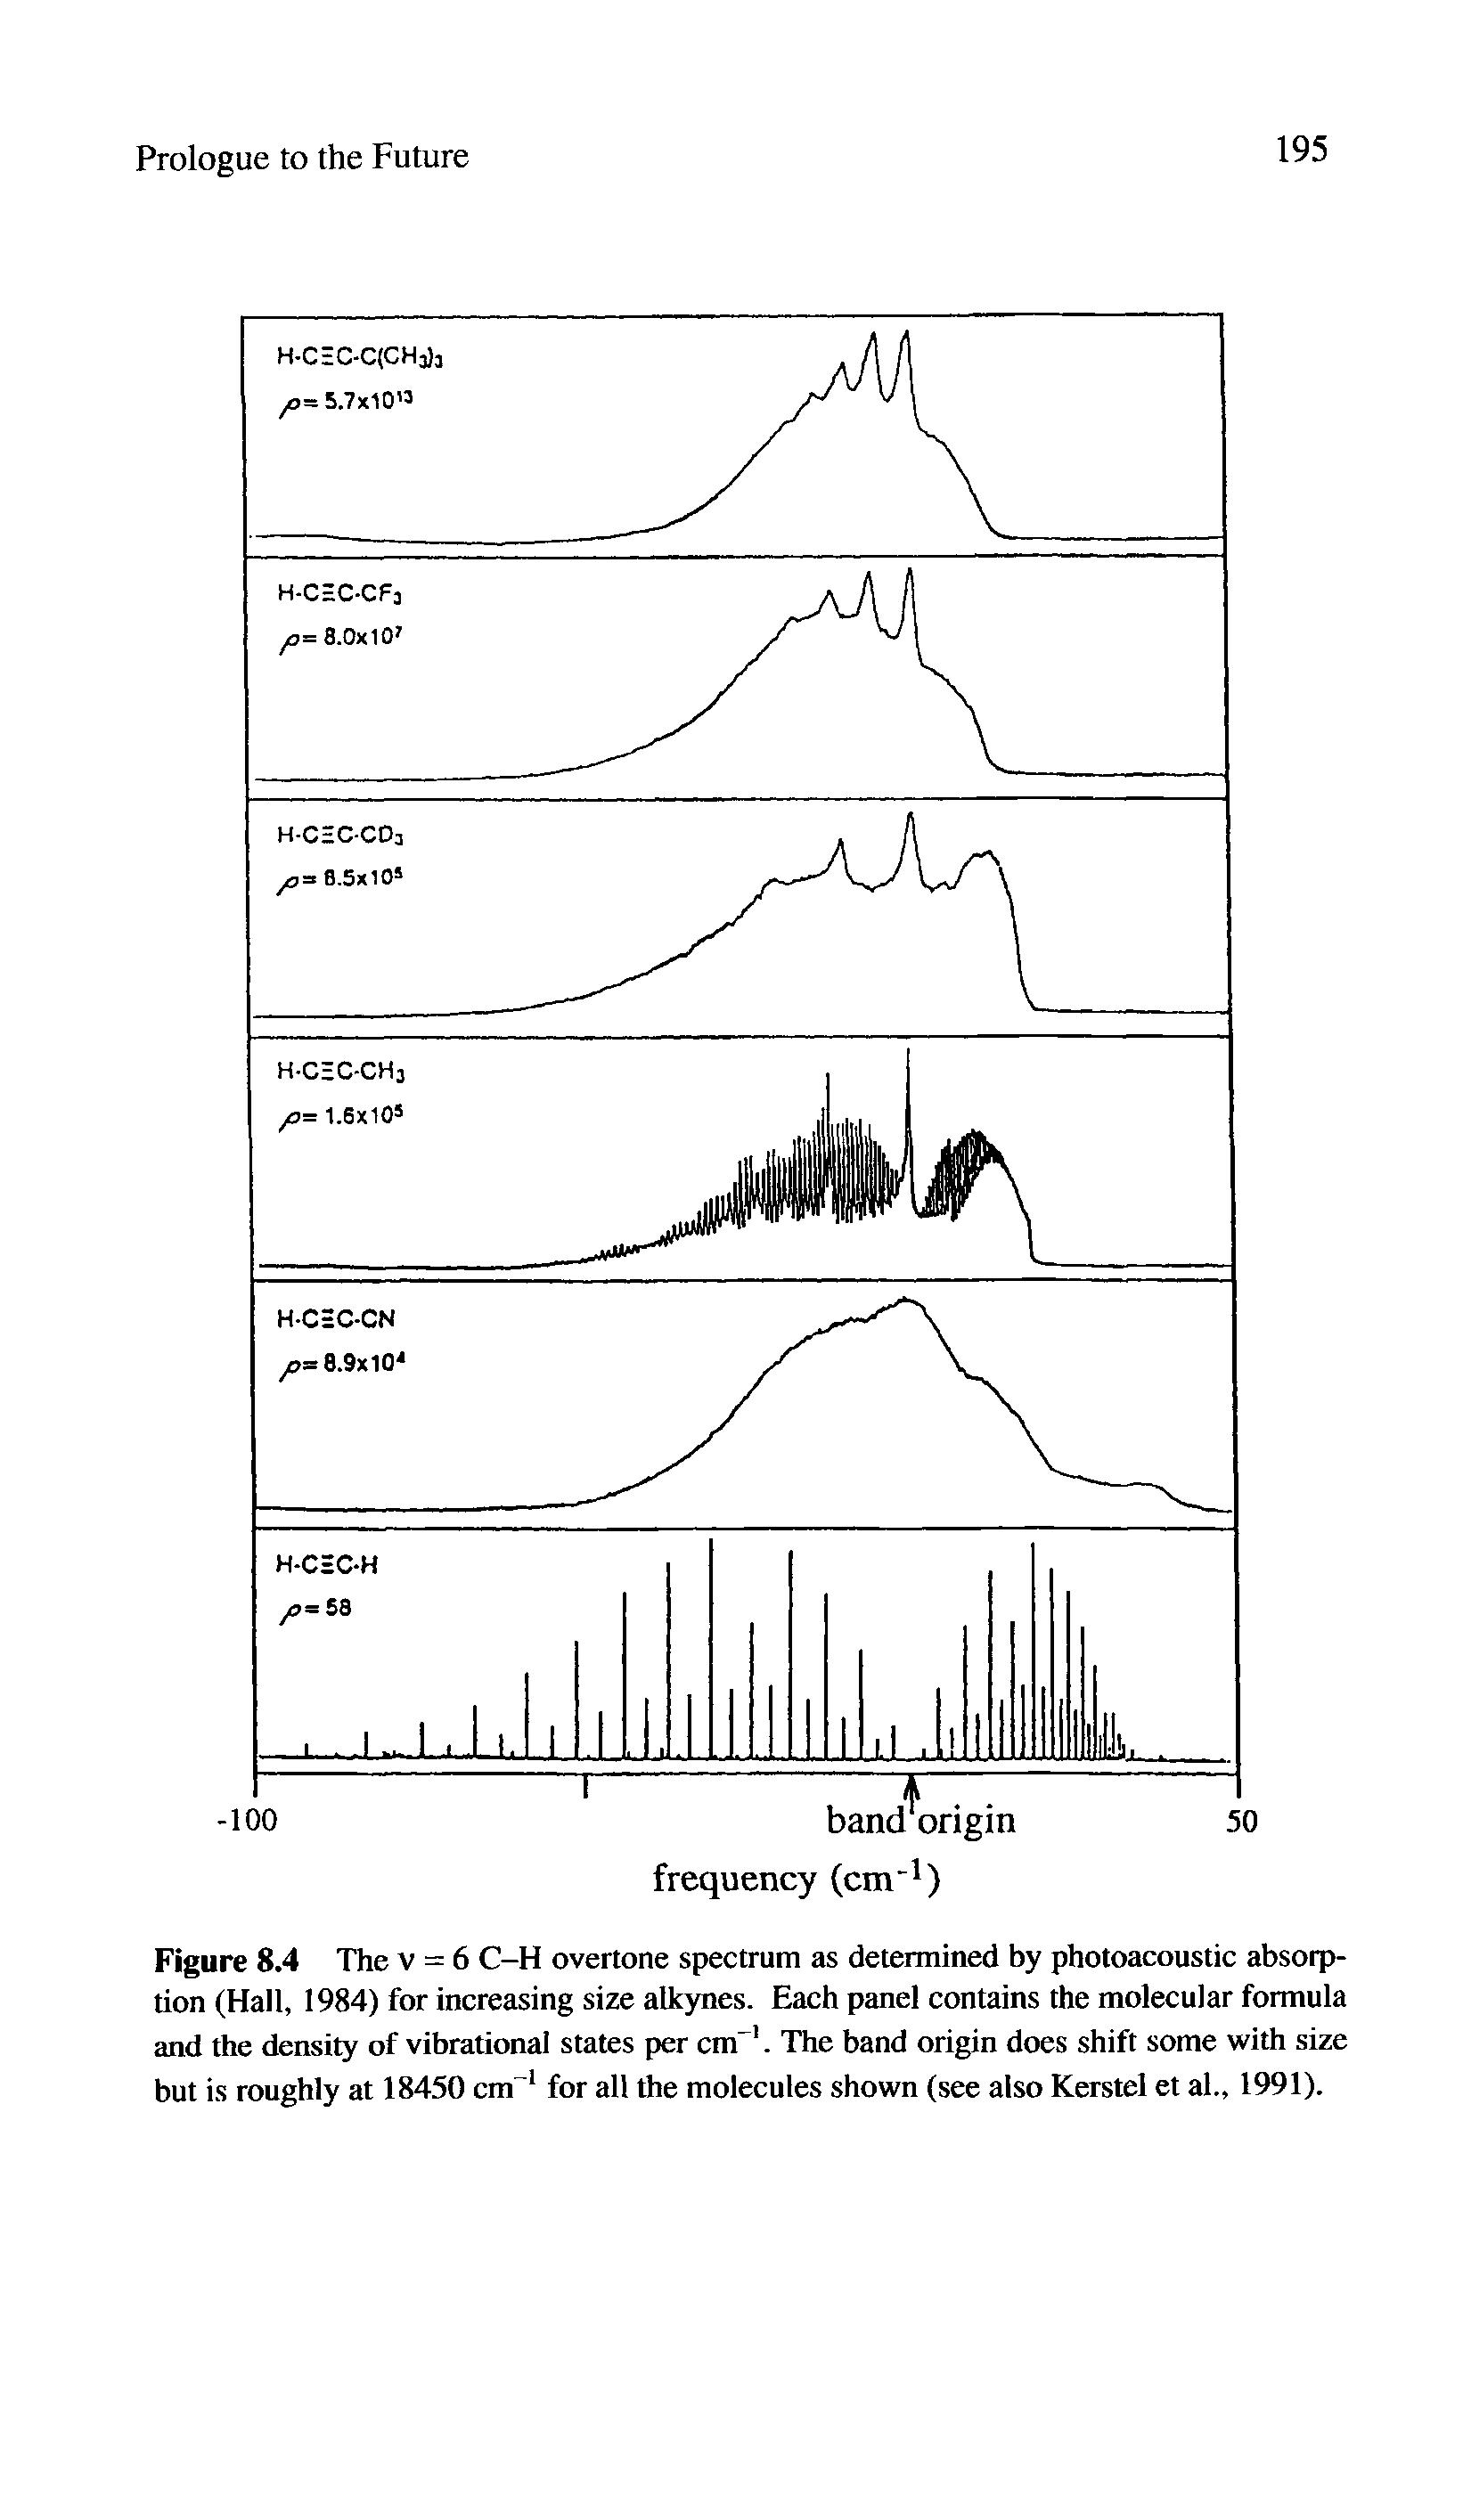 Figure 8.4 The v = 6 C-H overtone spectrum as determined by photoacoustic absorption (Hall, 1984) for increasing size alkynes. Each panel contains the molecular formula and the density of vibrational states per cm 1. The band origin does shift some with size but is roughly at 18450 cm"1 for all the molecules shown (see also Kerstel et al., 1991).